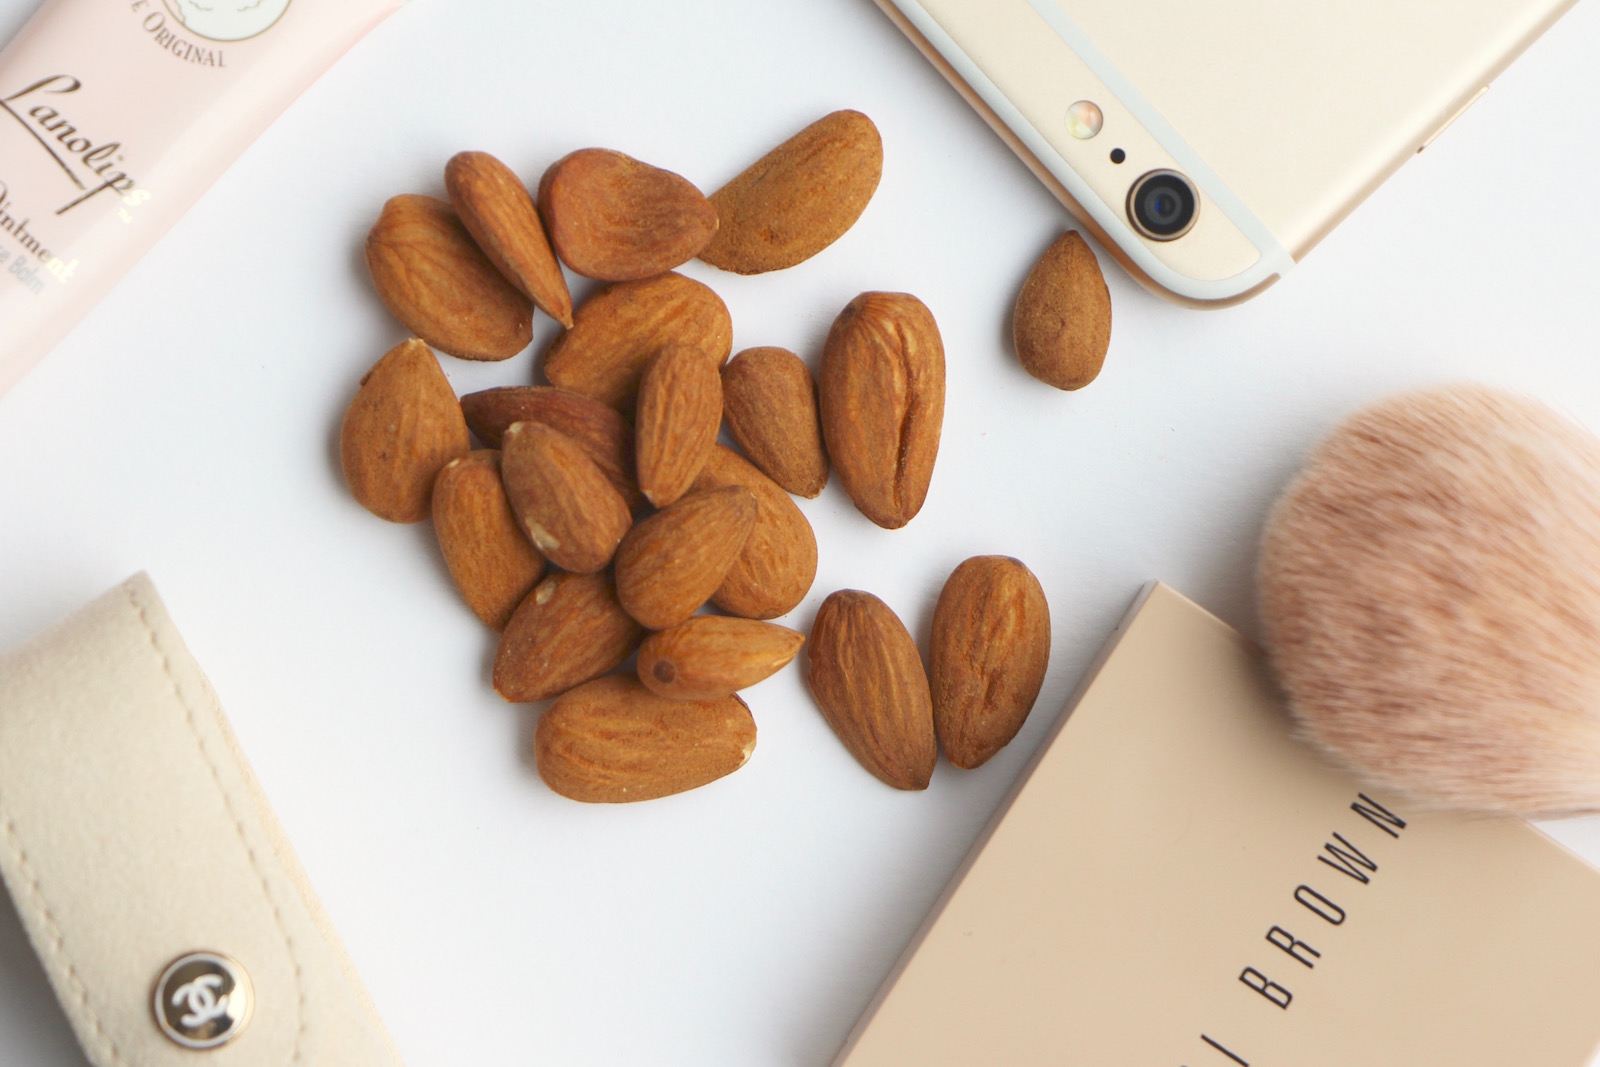 Almonds: My Health and Beauty Snack Swap | AD